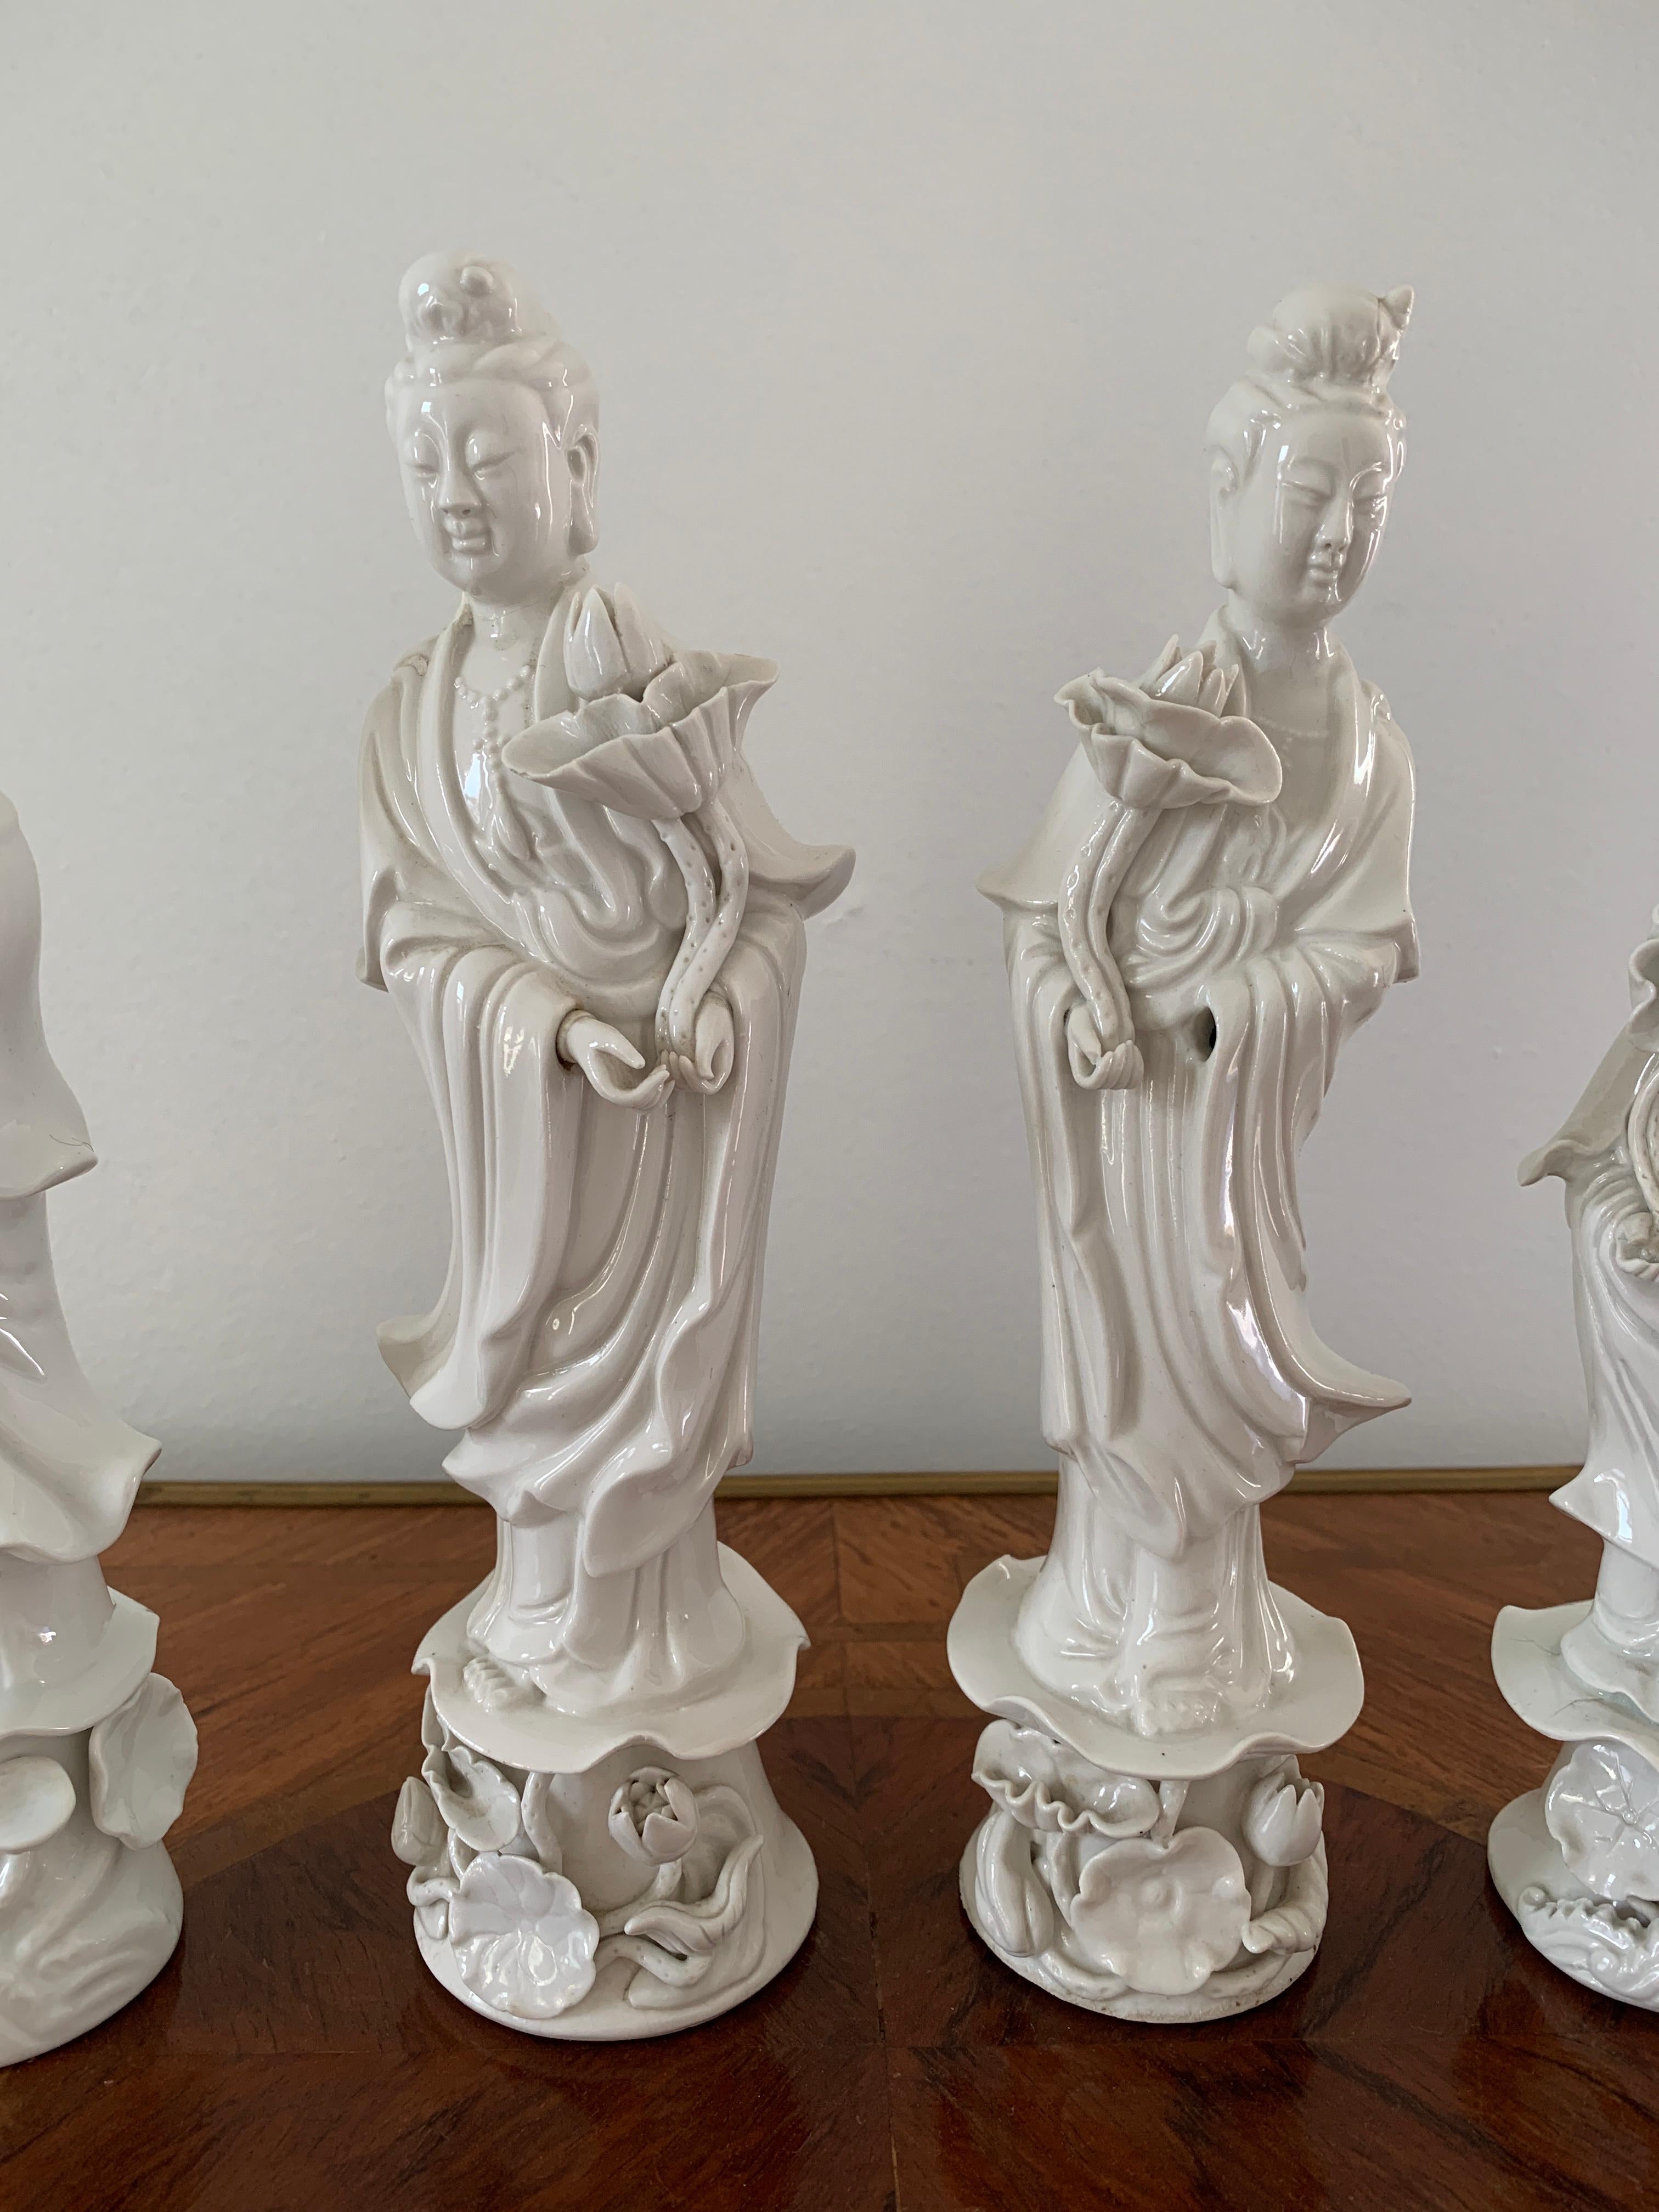 Chinoiserie Mid 20th Century Vintage Blanc De Chine Figures - Set of 4 For Sale